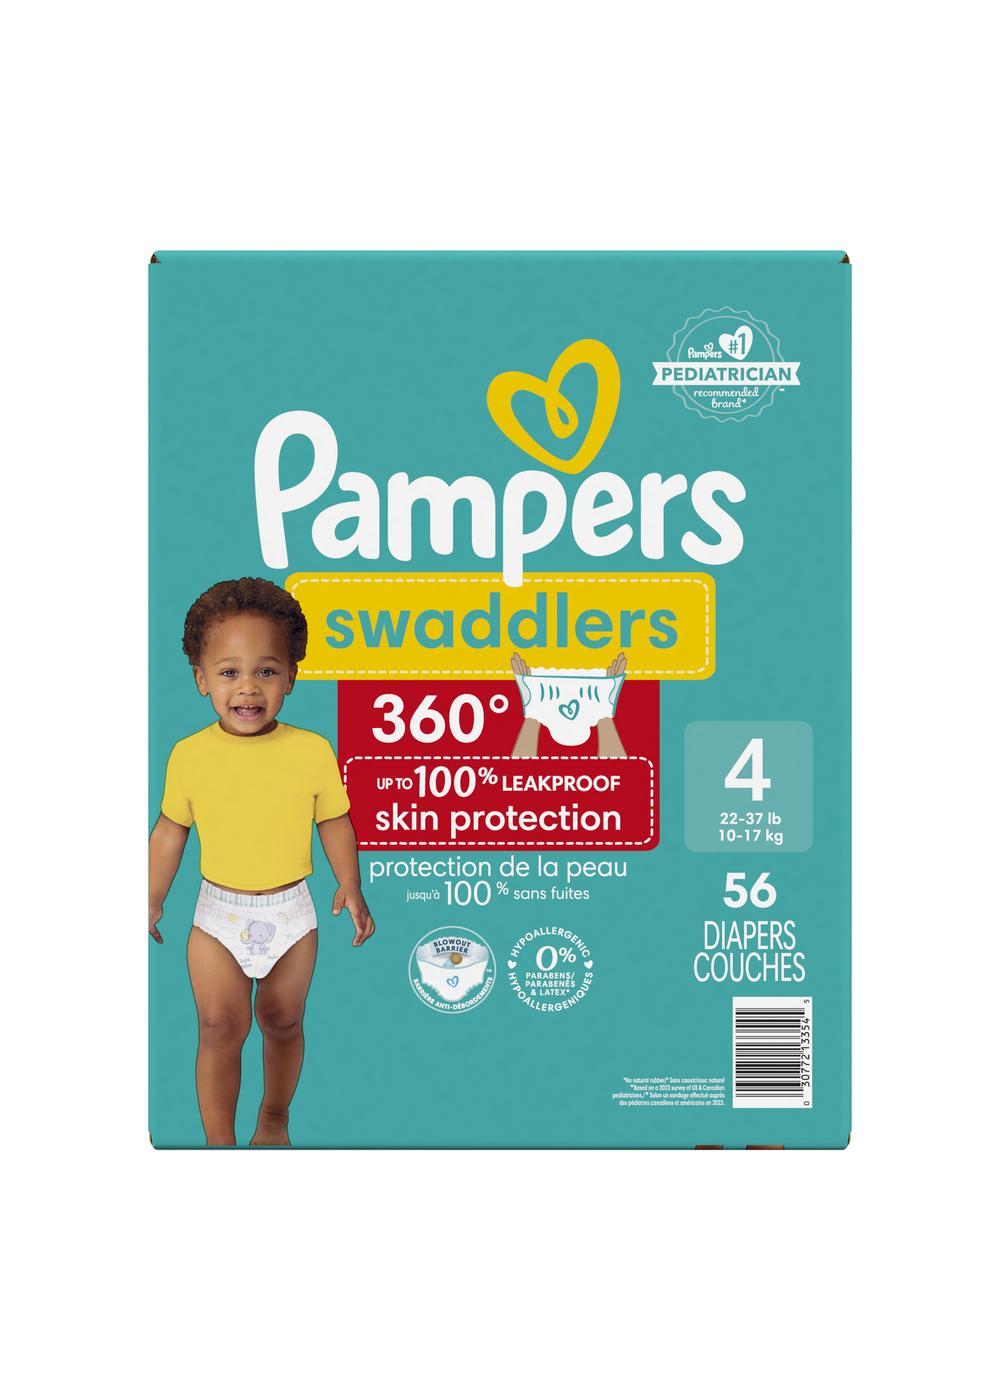 Pampers Swaddlers 360 Diapers - Size 4; image 3 of 3